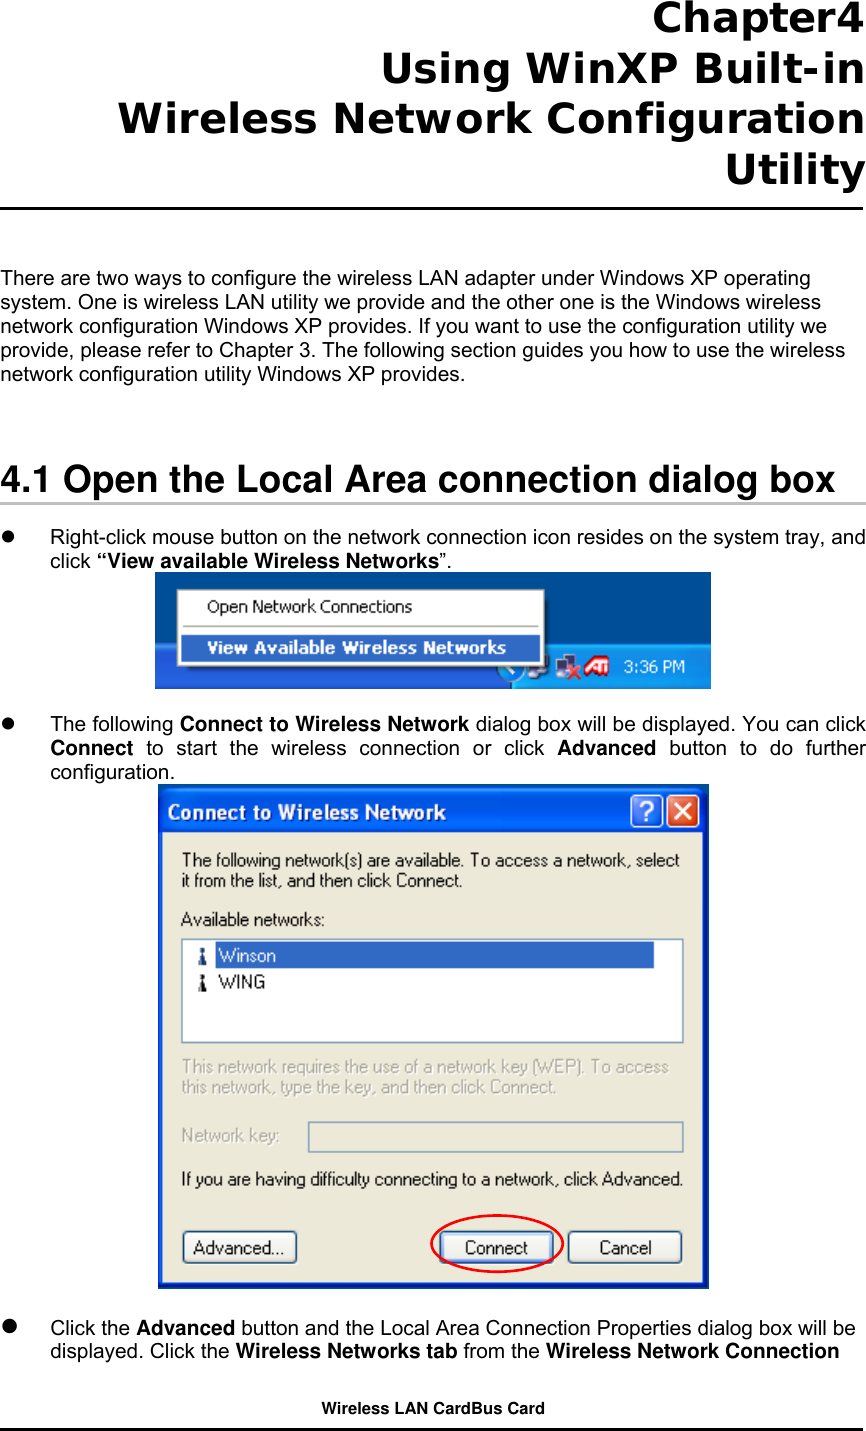  Chapter4  Using WinXP Built-in Wireless Network Configuration Utility    There are two ways to configure the wireless LAN adapter under Windows XP operating system. One is wireless LAN utility we provide and the other one is the Windows wireless network configuration Windows XP provides. If you want to use the configuration utility we provide, please refer to Chapter 3. The following section guides you how to use the wireless network configuration utility Windows XP provides.      4.1 Open the Local Area connection dialog box    Right-click mouse button on the network connection icon resides on the system tray, and click “View available Wireless Networks”.     The following Connect to Wireless Network dialog box will be displayed. You can click Connect to start the wireless connection or click Advanced button to do further configuration.     Click the Advanced button and the Local Area Connection Properties dialog box will be displayed. Click the Wireless Networks tab from the Wireless Network Connection Wireless LAN CardBus Card 